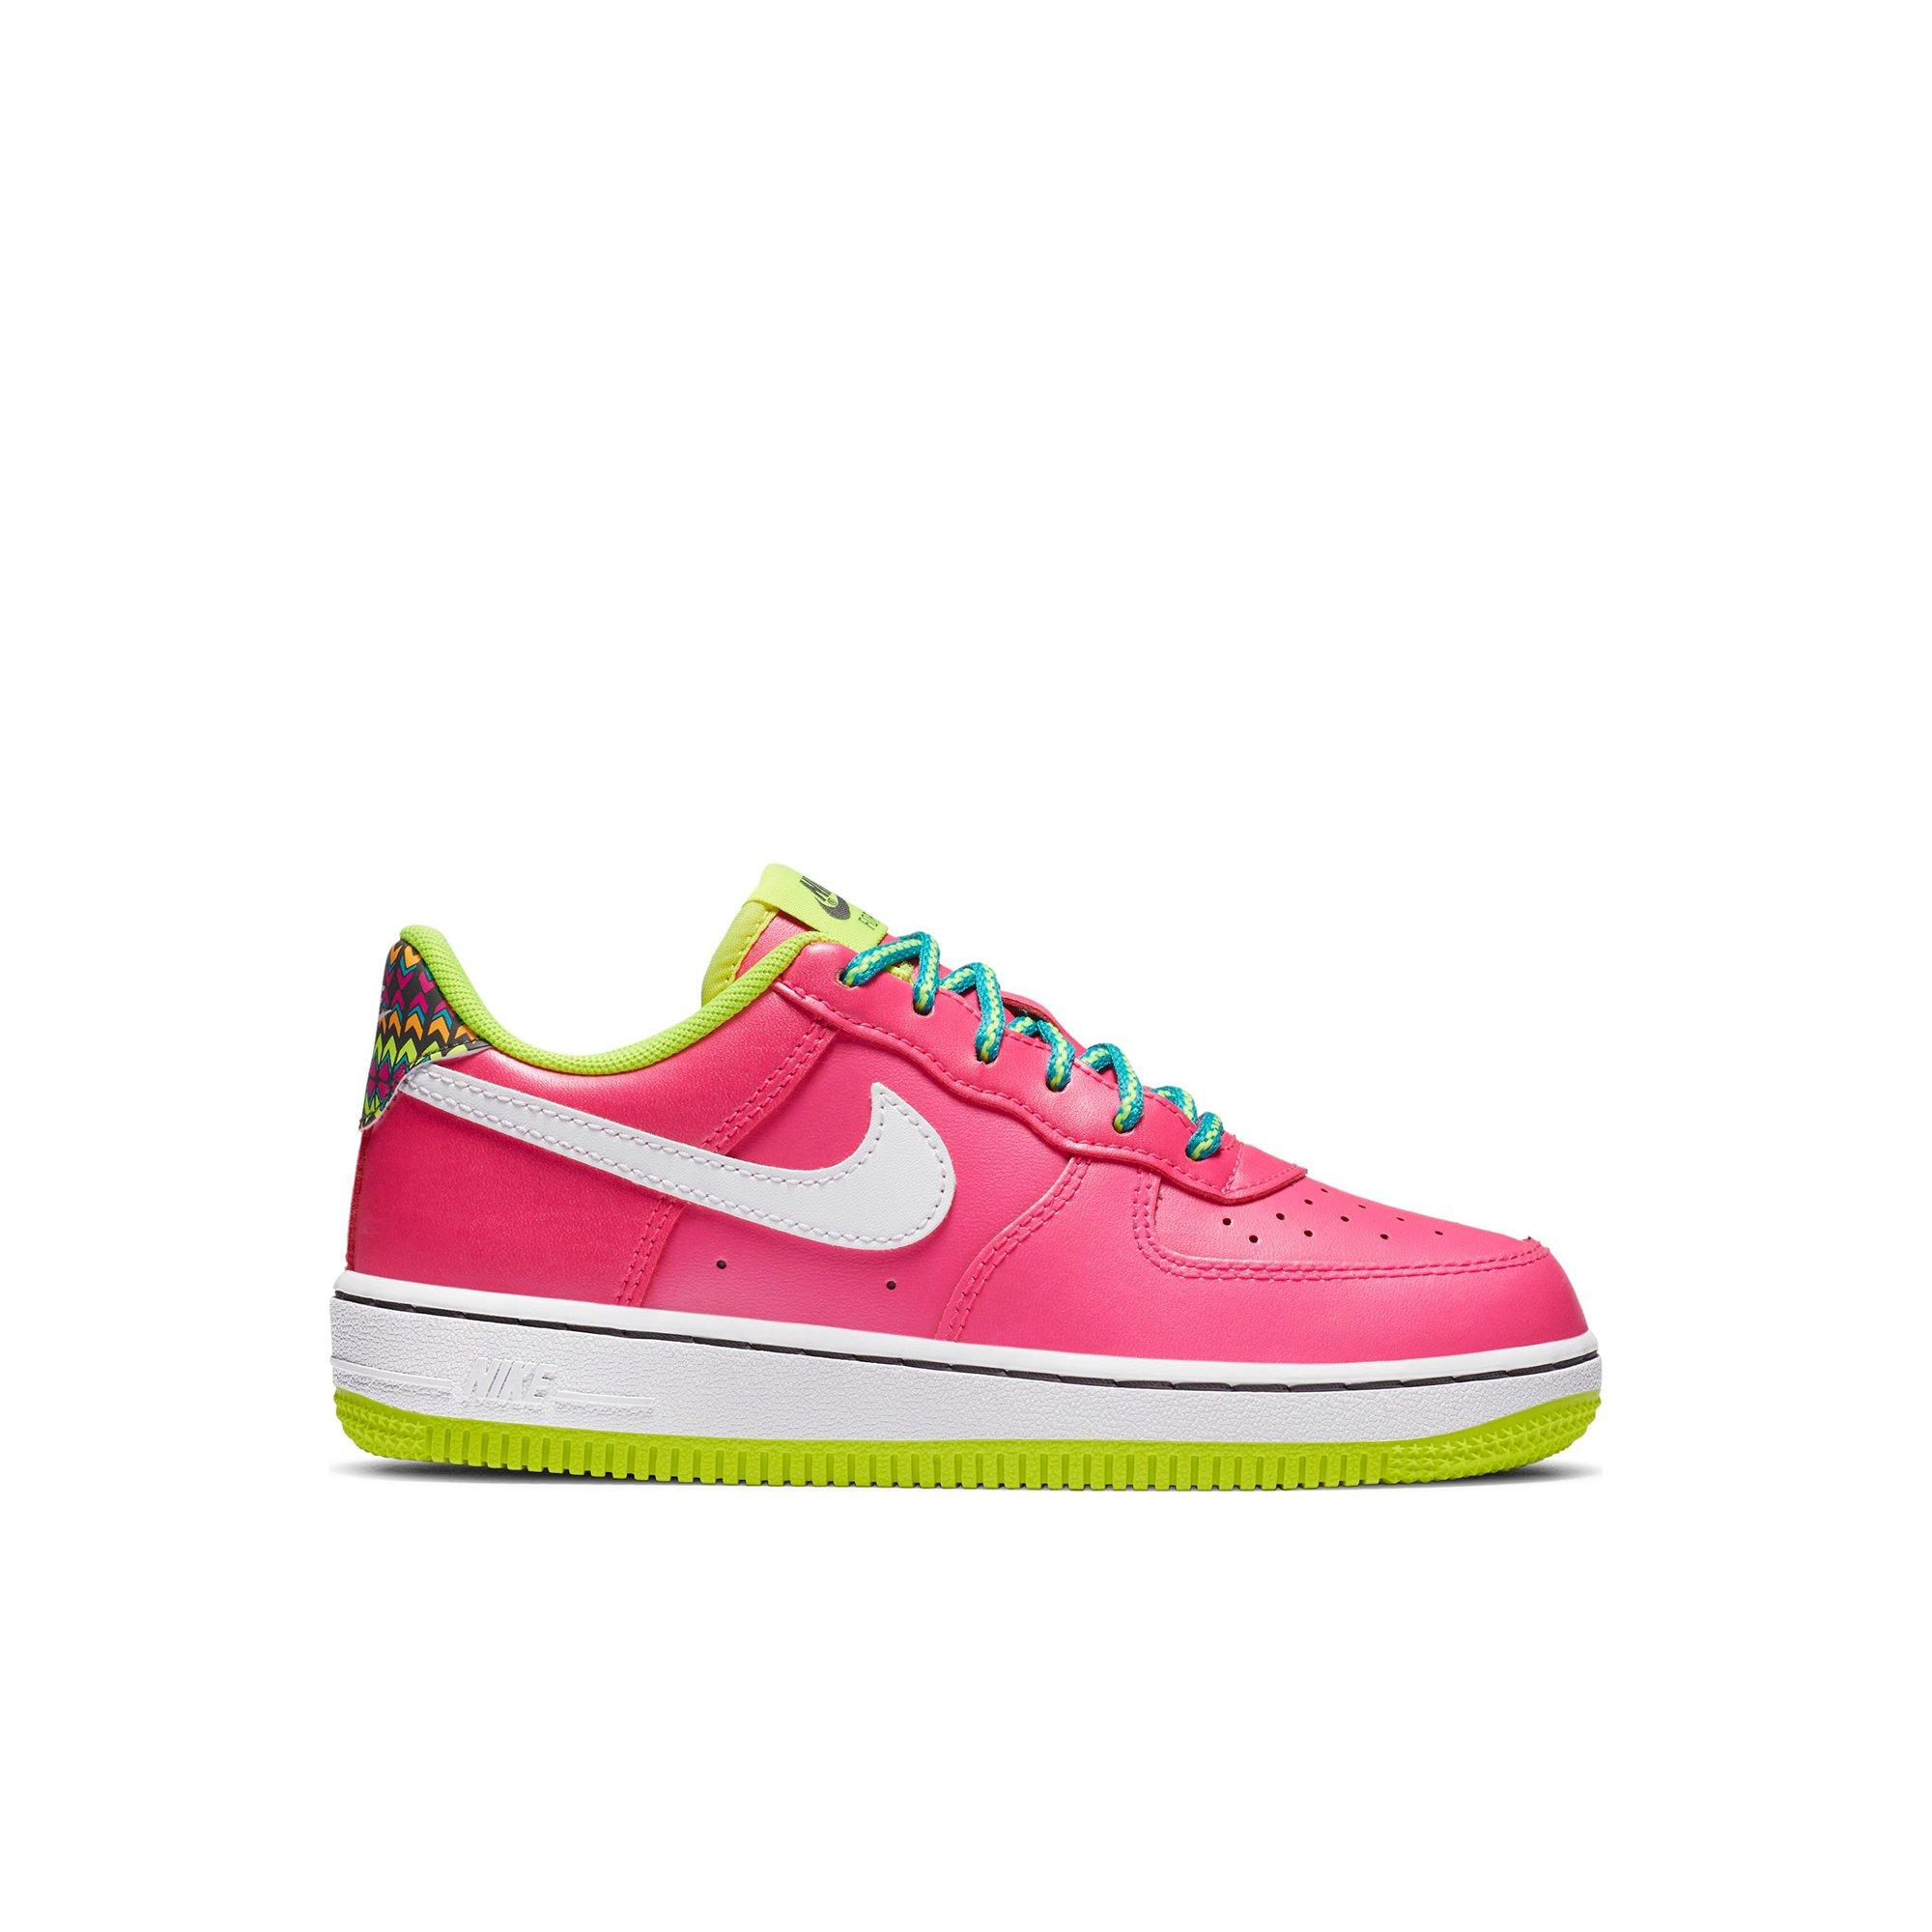 air forces with pink bottom